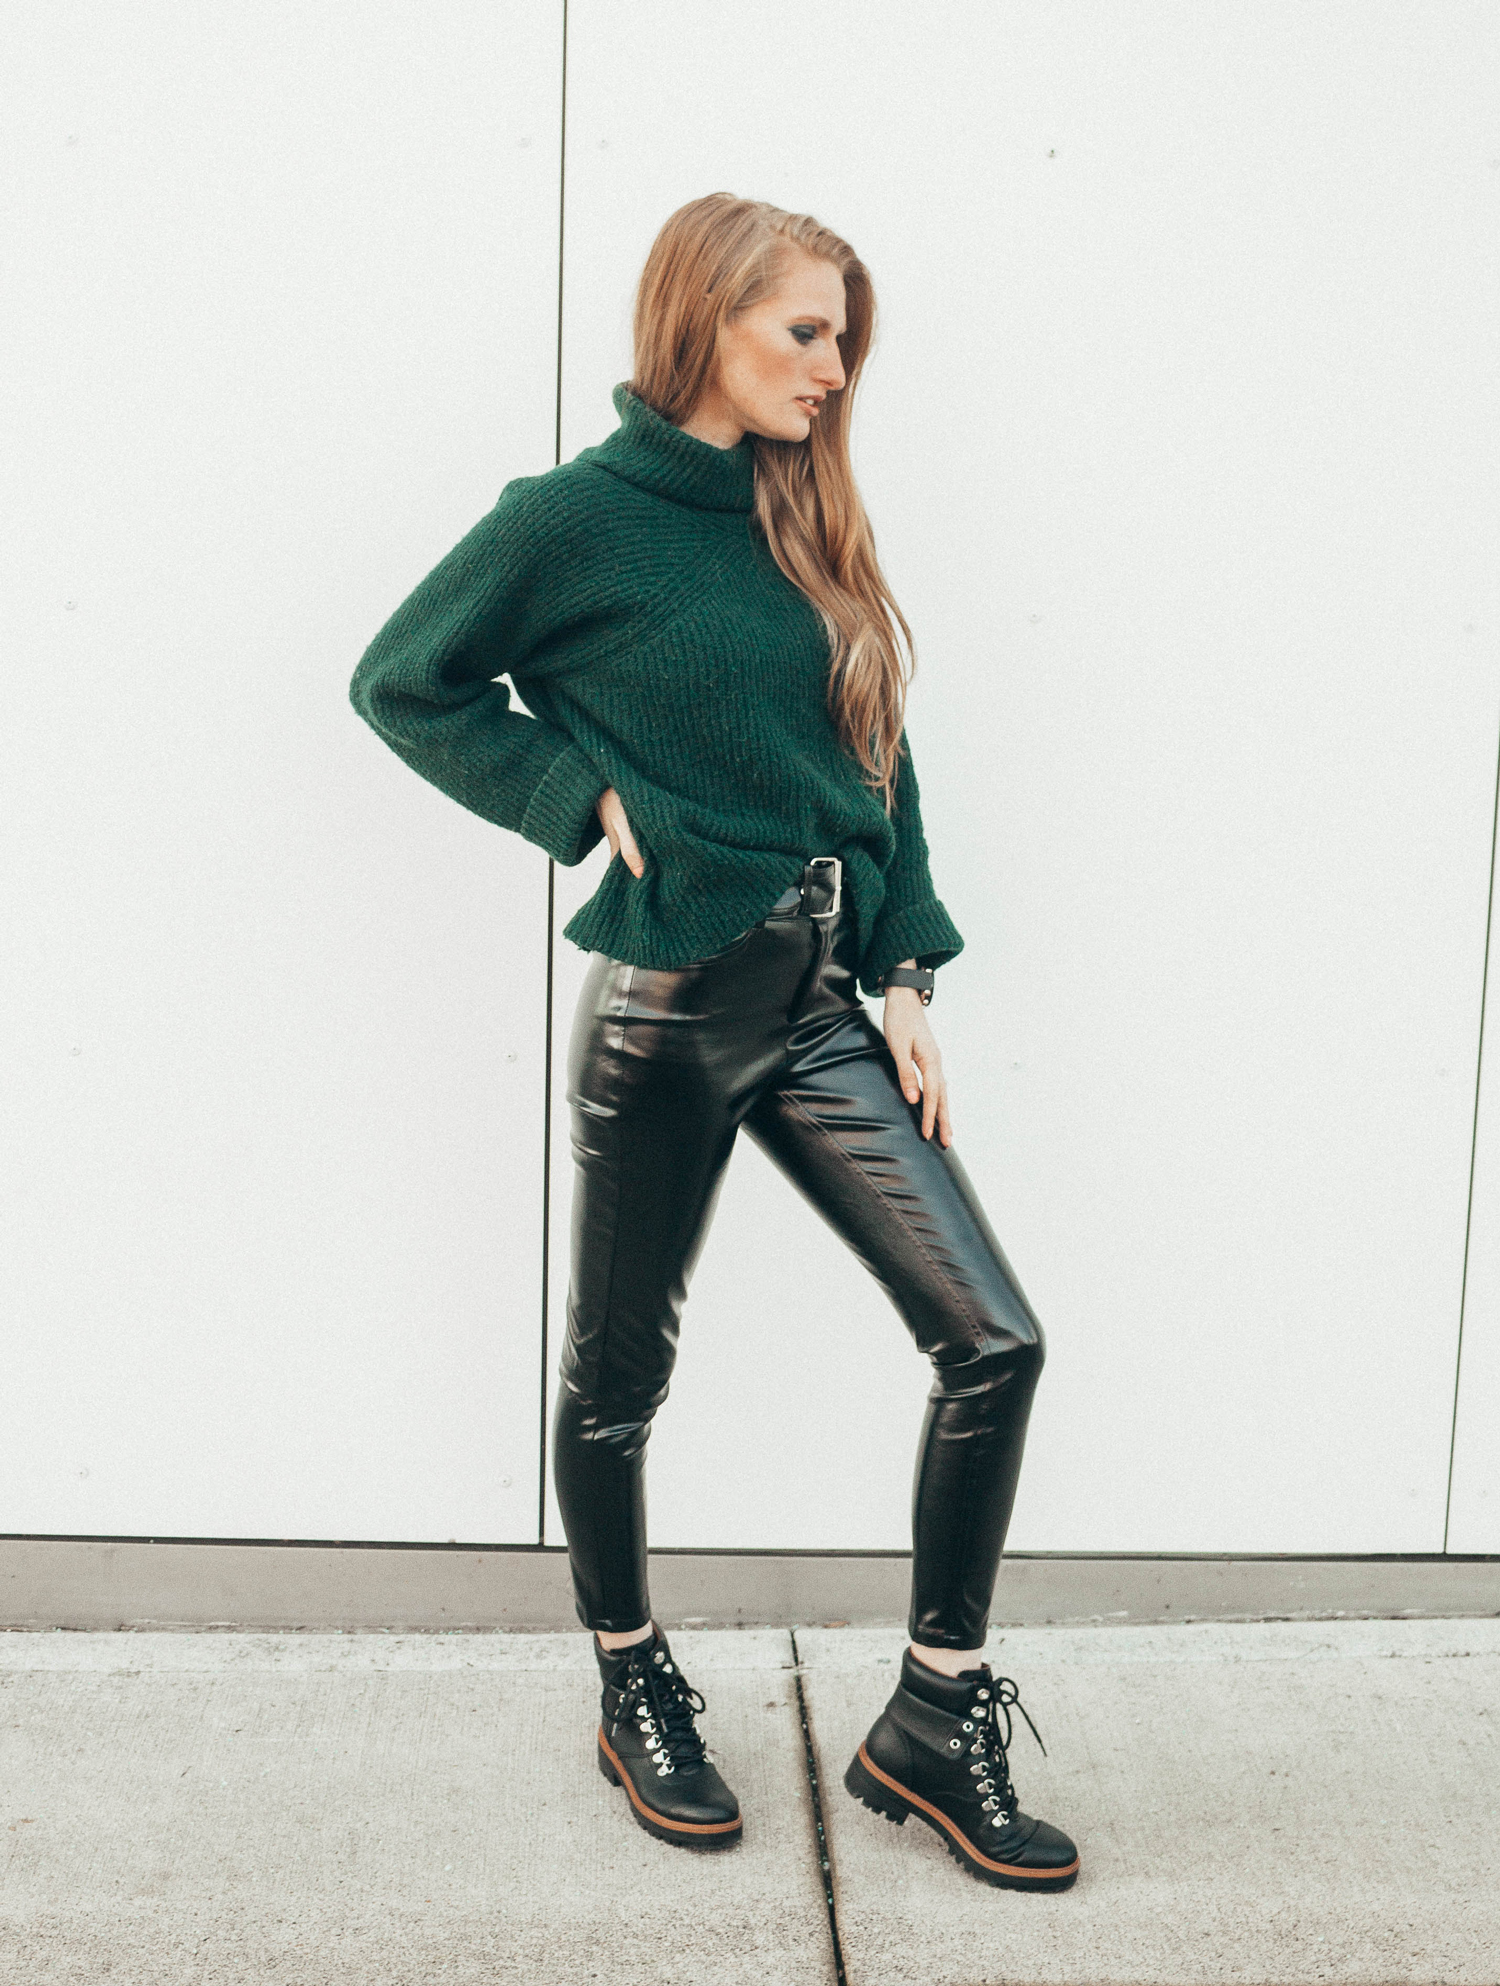 vinyl patent pants green turtle neck sweater xle nakd outfit style black